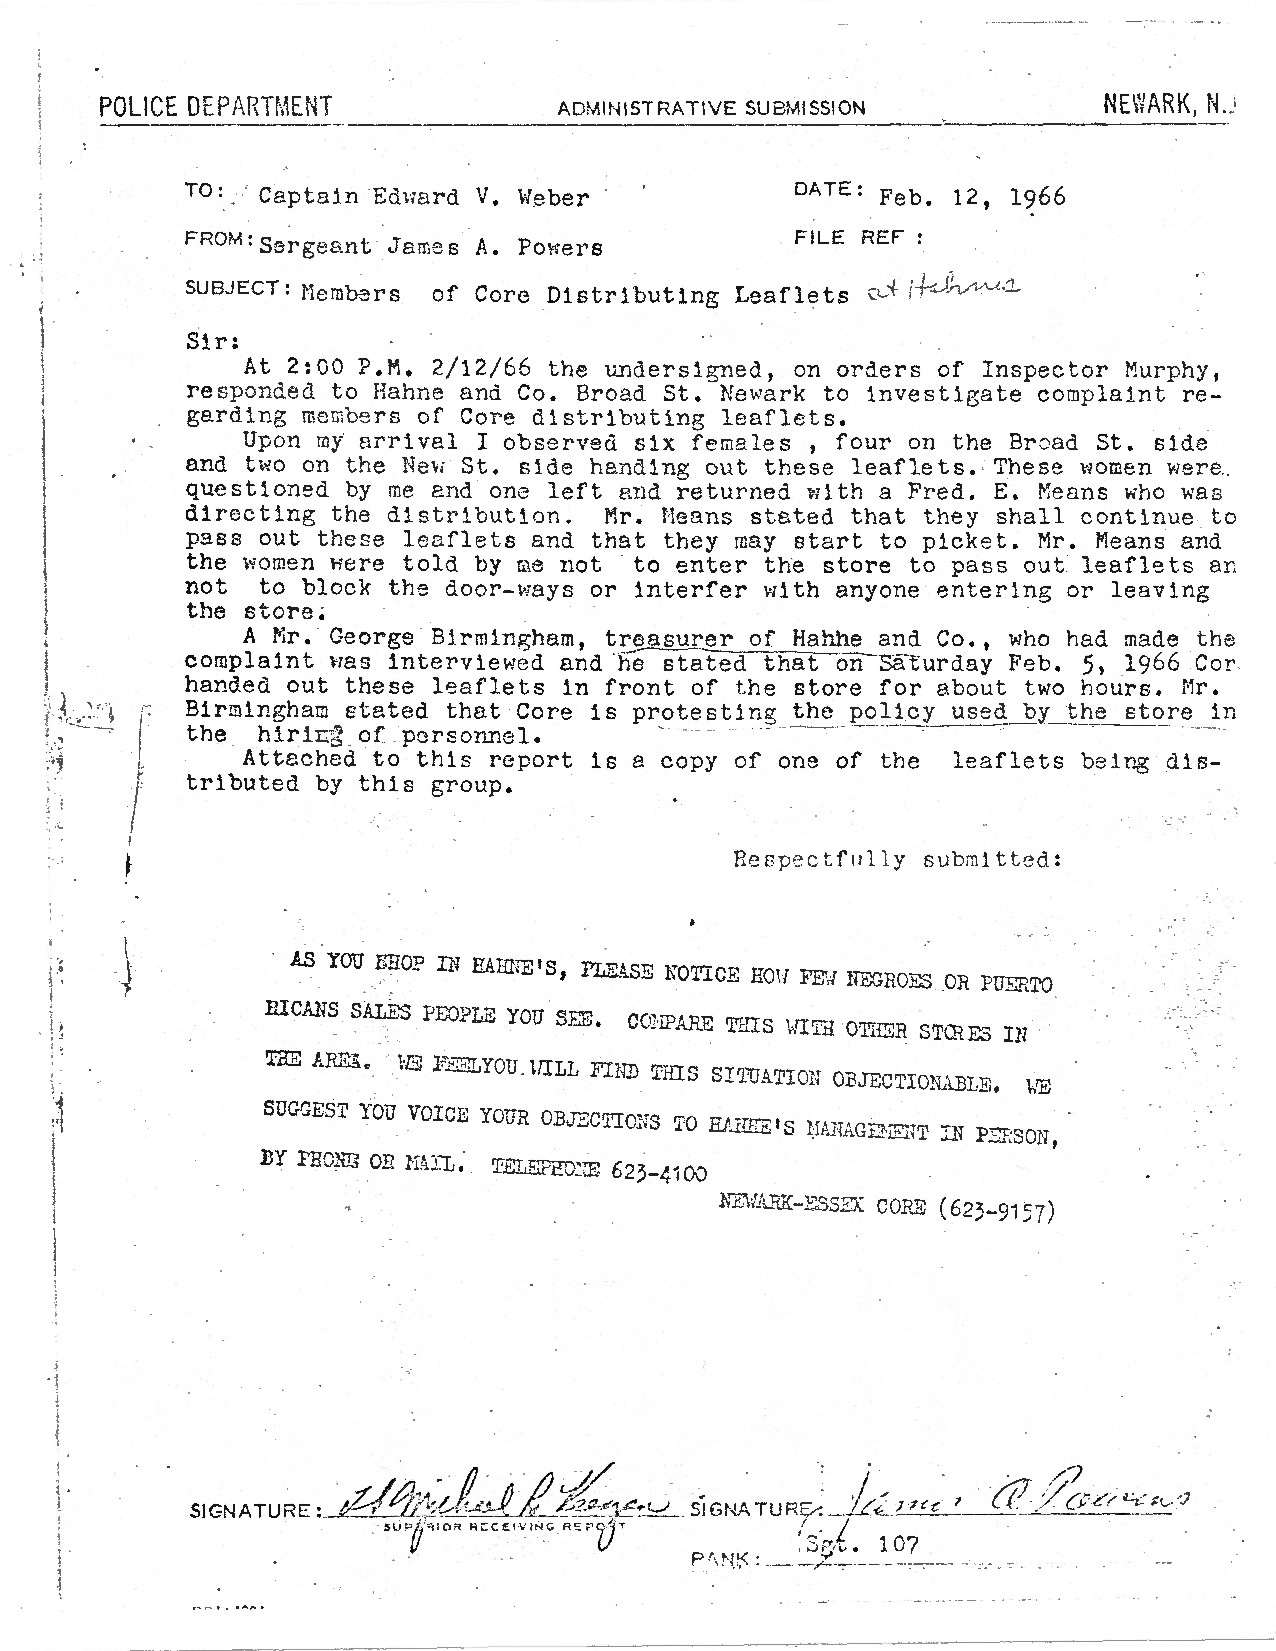 Police Report on CORE Activity, 1966